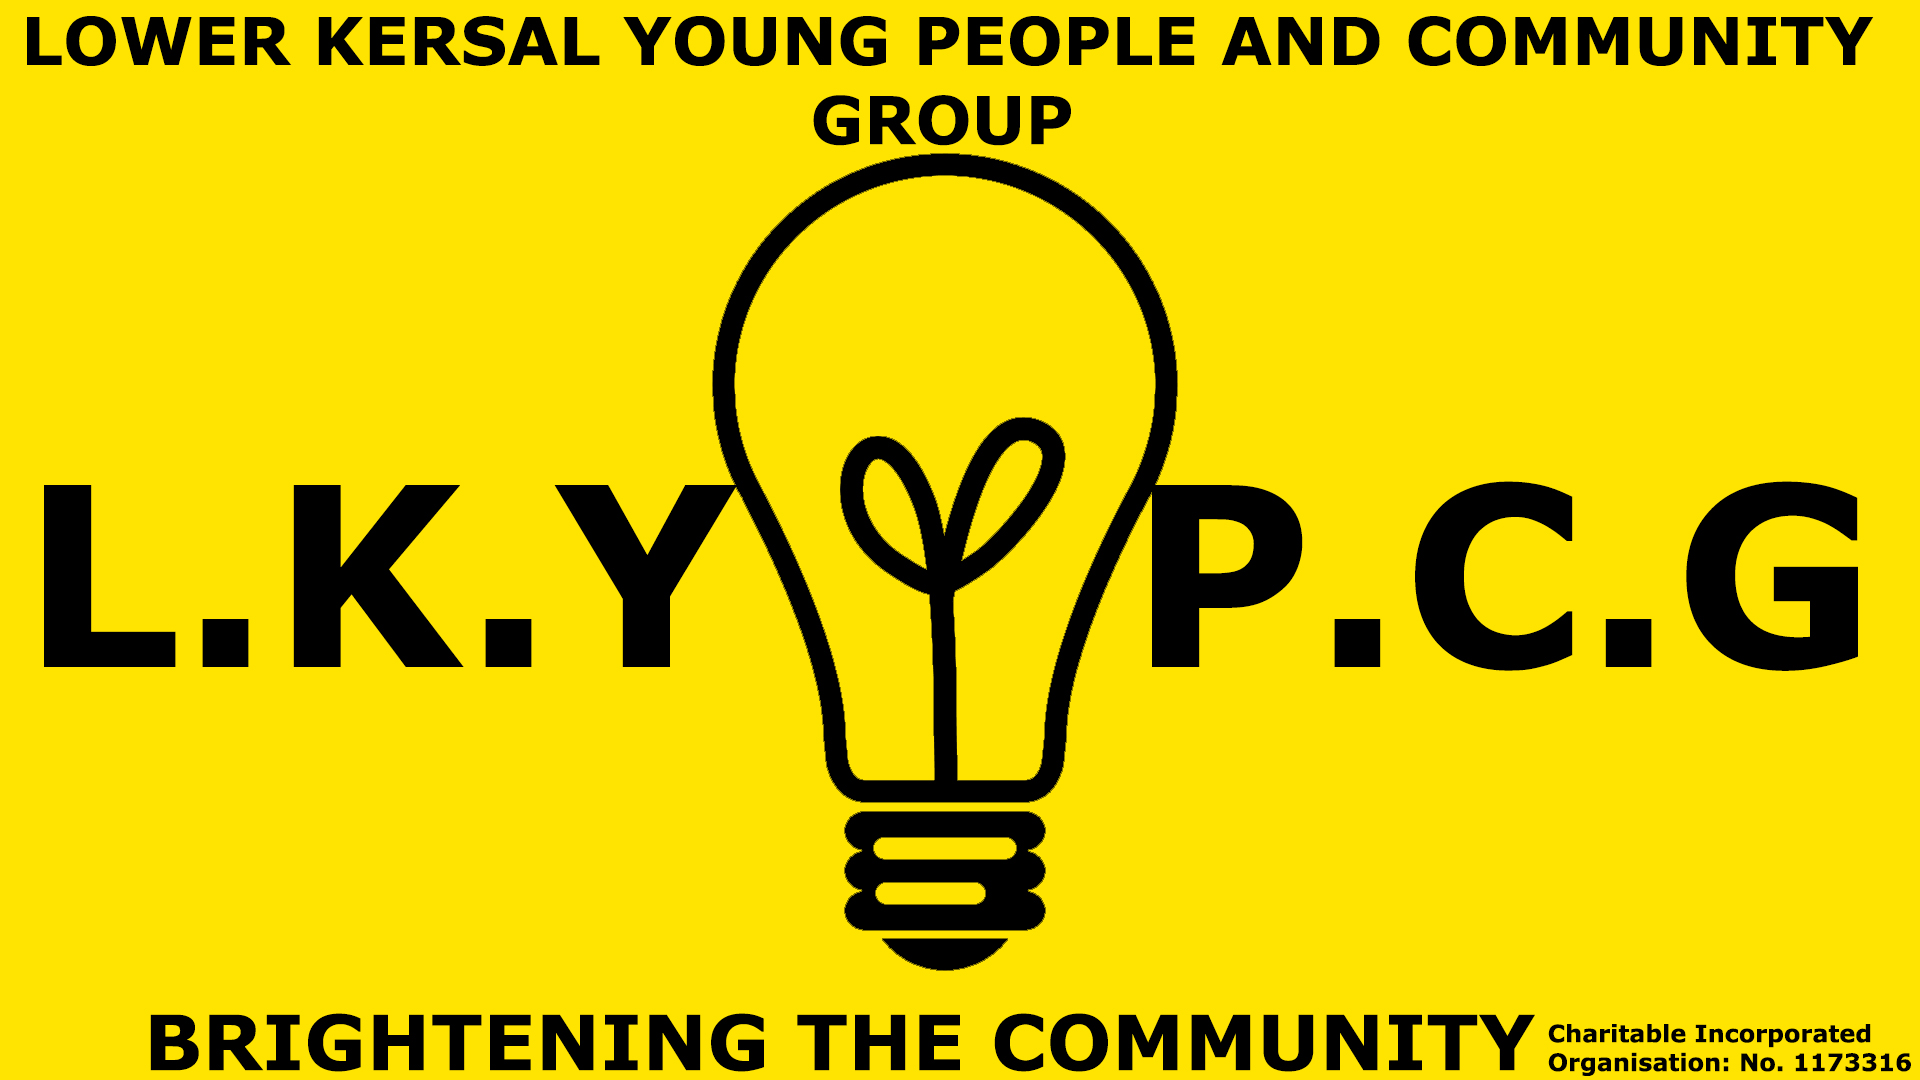 L.K.Y.P.C.G is now a Registered Charity